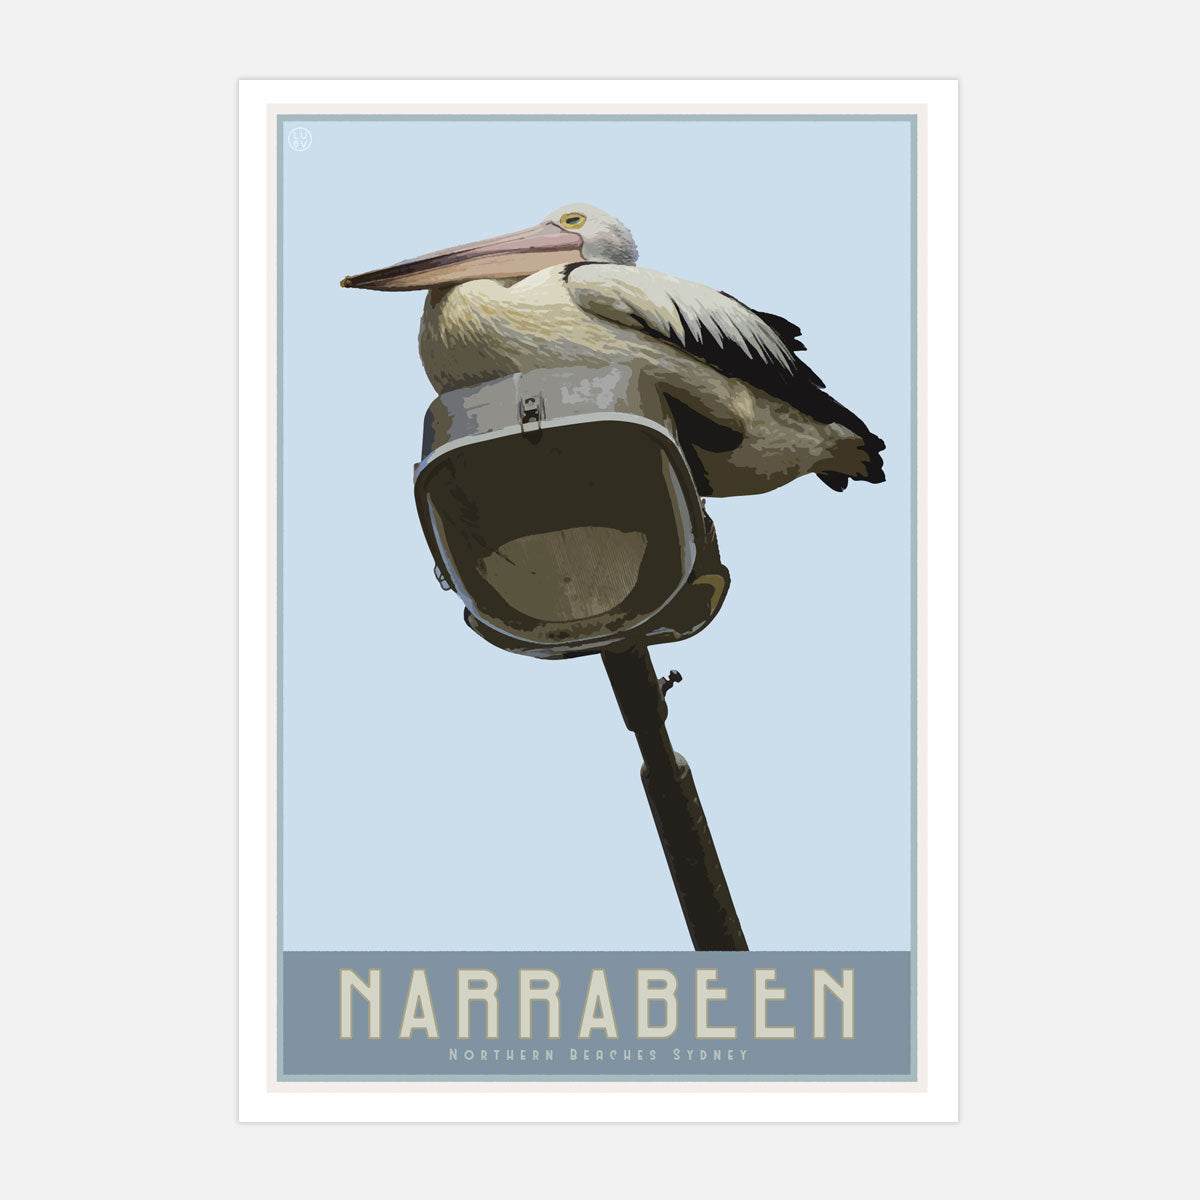 Narrabeen vintage travel retro poster - places we luv